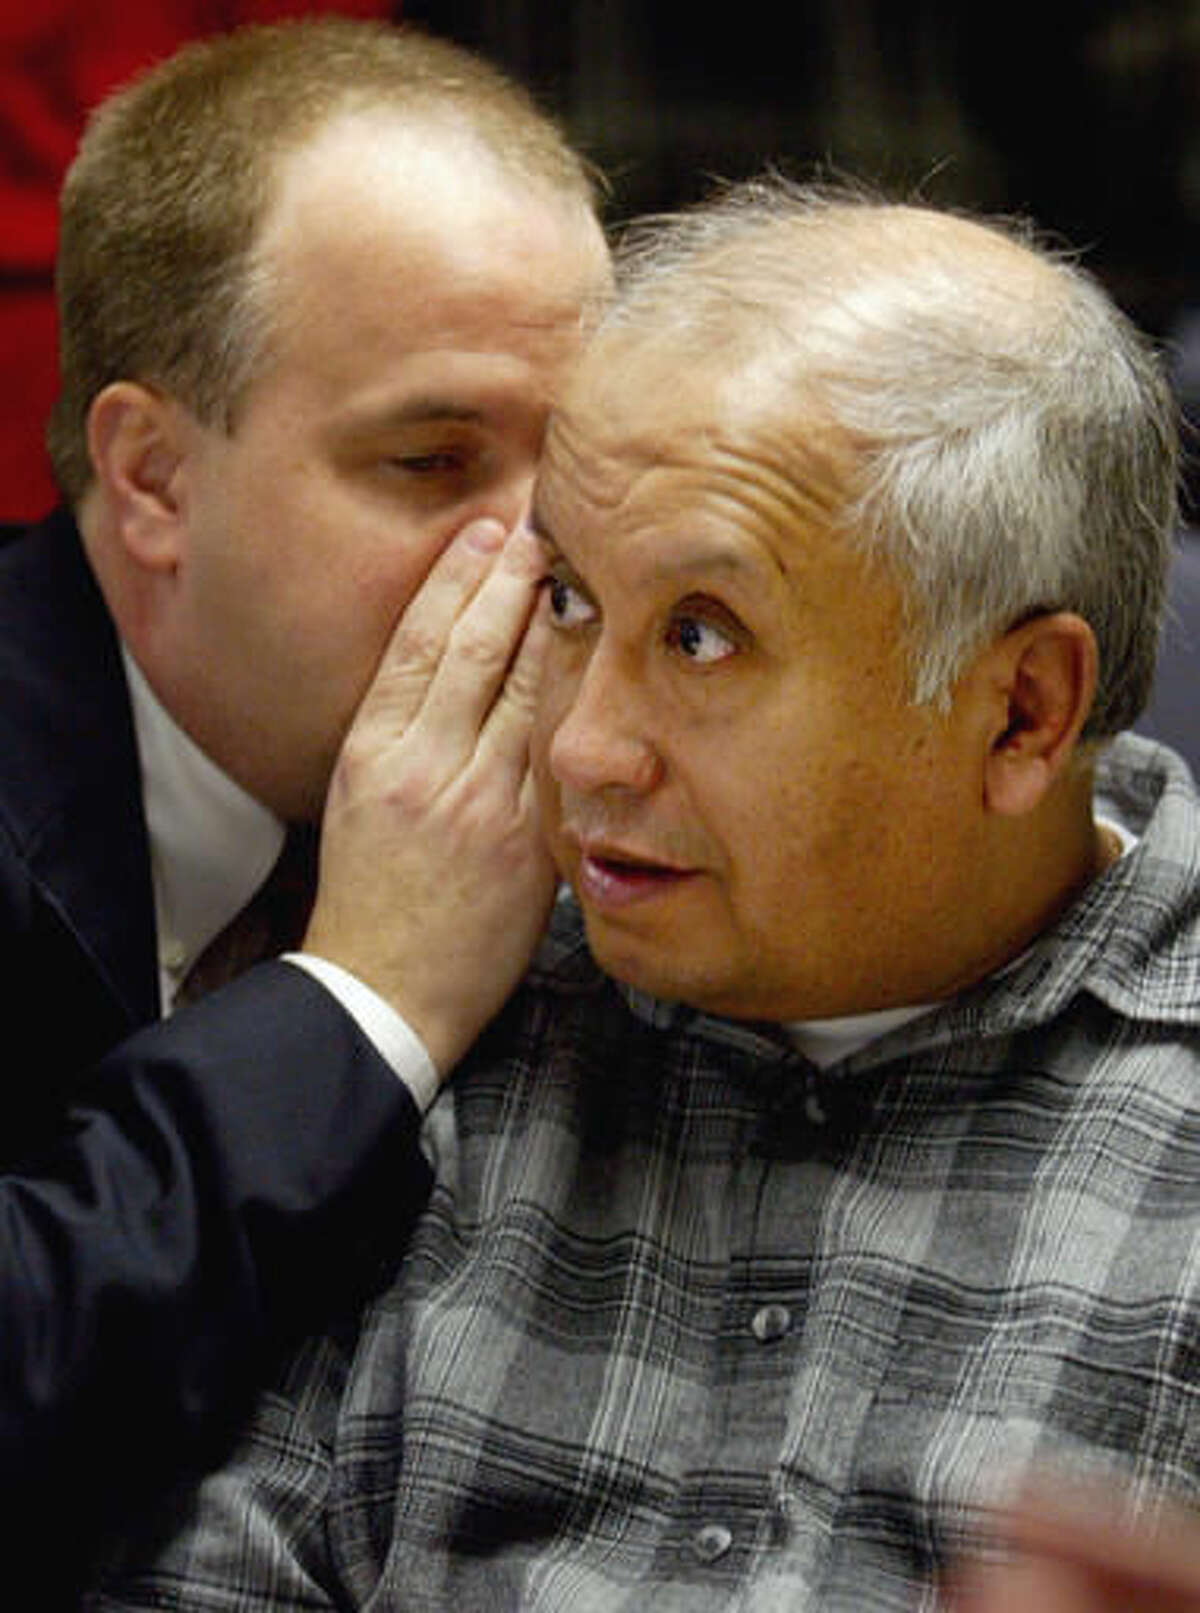 FILE - In this March 5, 2004 file photo, Alfonso Rodriguez Jr., of Crookston, Minn., listens as his attorney David Dusek, whispers to him during a preliminary hearing in Grand Forks, N.D. Rodriguez was convicted in 2005 of kidnapping and killing University of North Dakota student Dru Sjodin. A federal judge on Tuesday, Aug. 16, 2016, pushed back two hearings in the Rodriguez's final death penalty appeal so Rodriguez's new defense team could catch up on evidence. (Jackie Lorentz/Grand Forks Herald via AP, Pool, File)